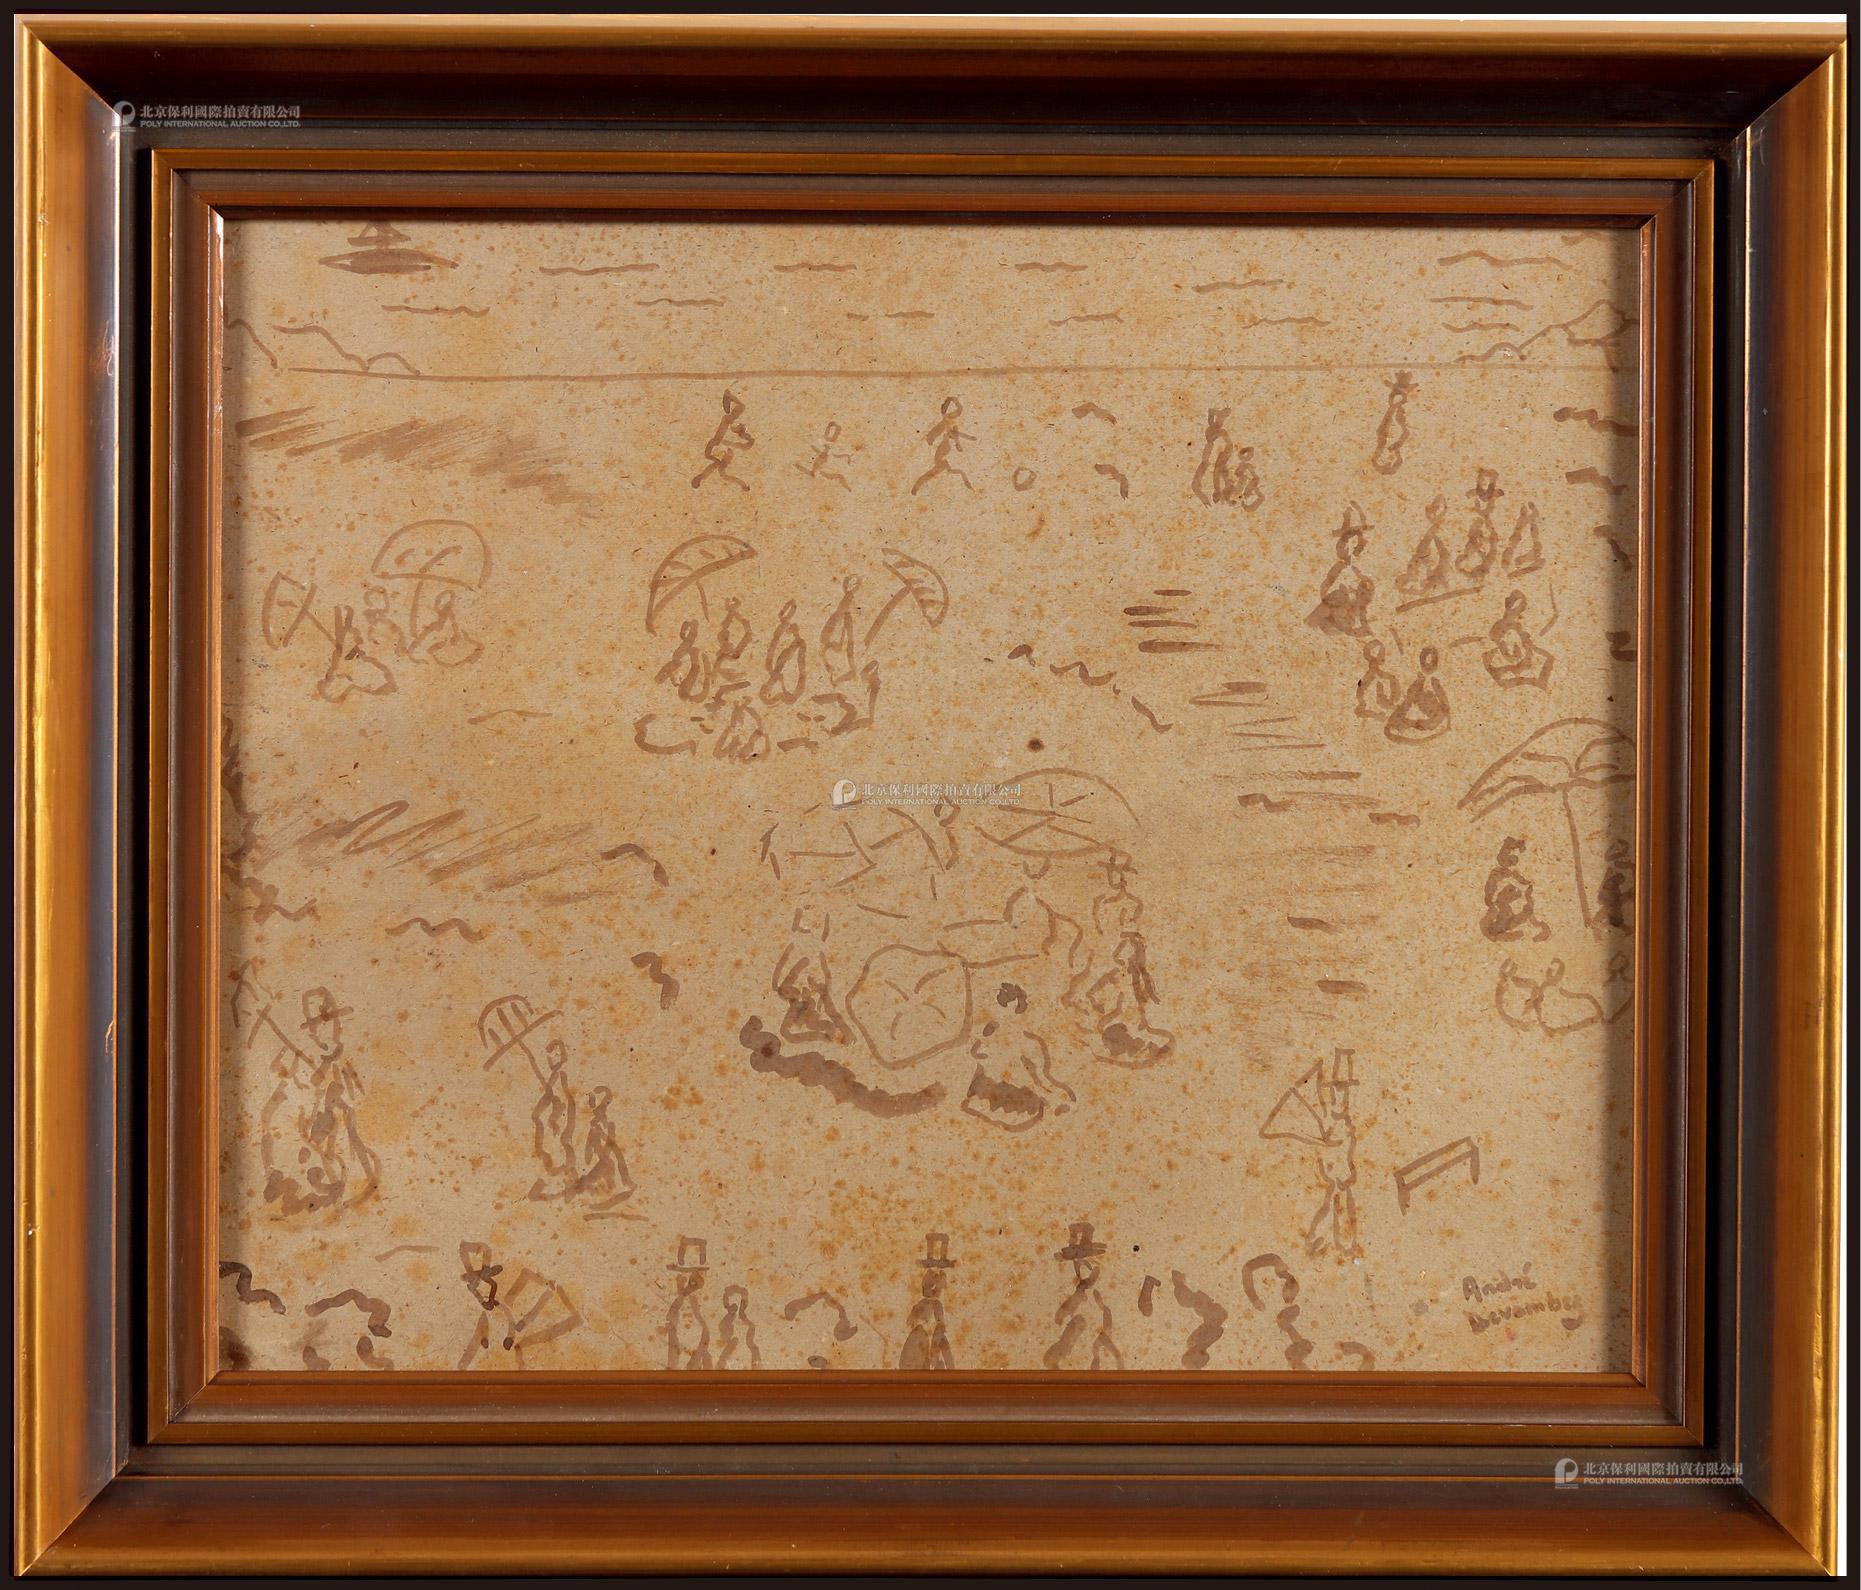 The sketch “A lively beach” by André Devambez, “Lv Sibai’s mentor and a famous French painter”, with a certificate